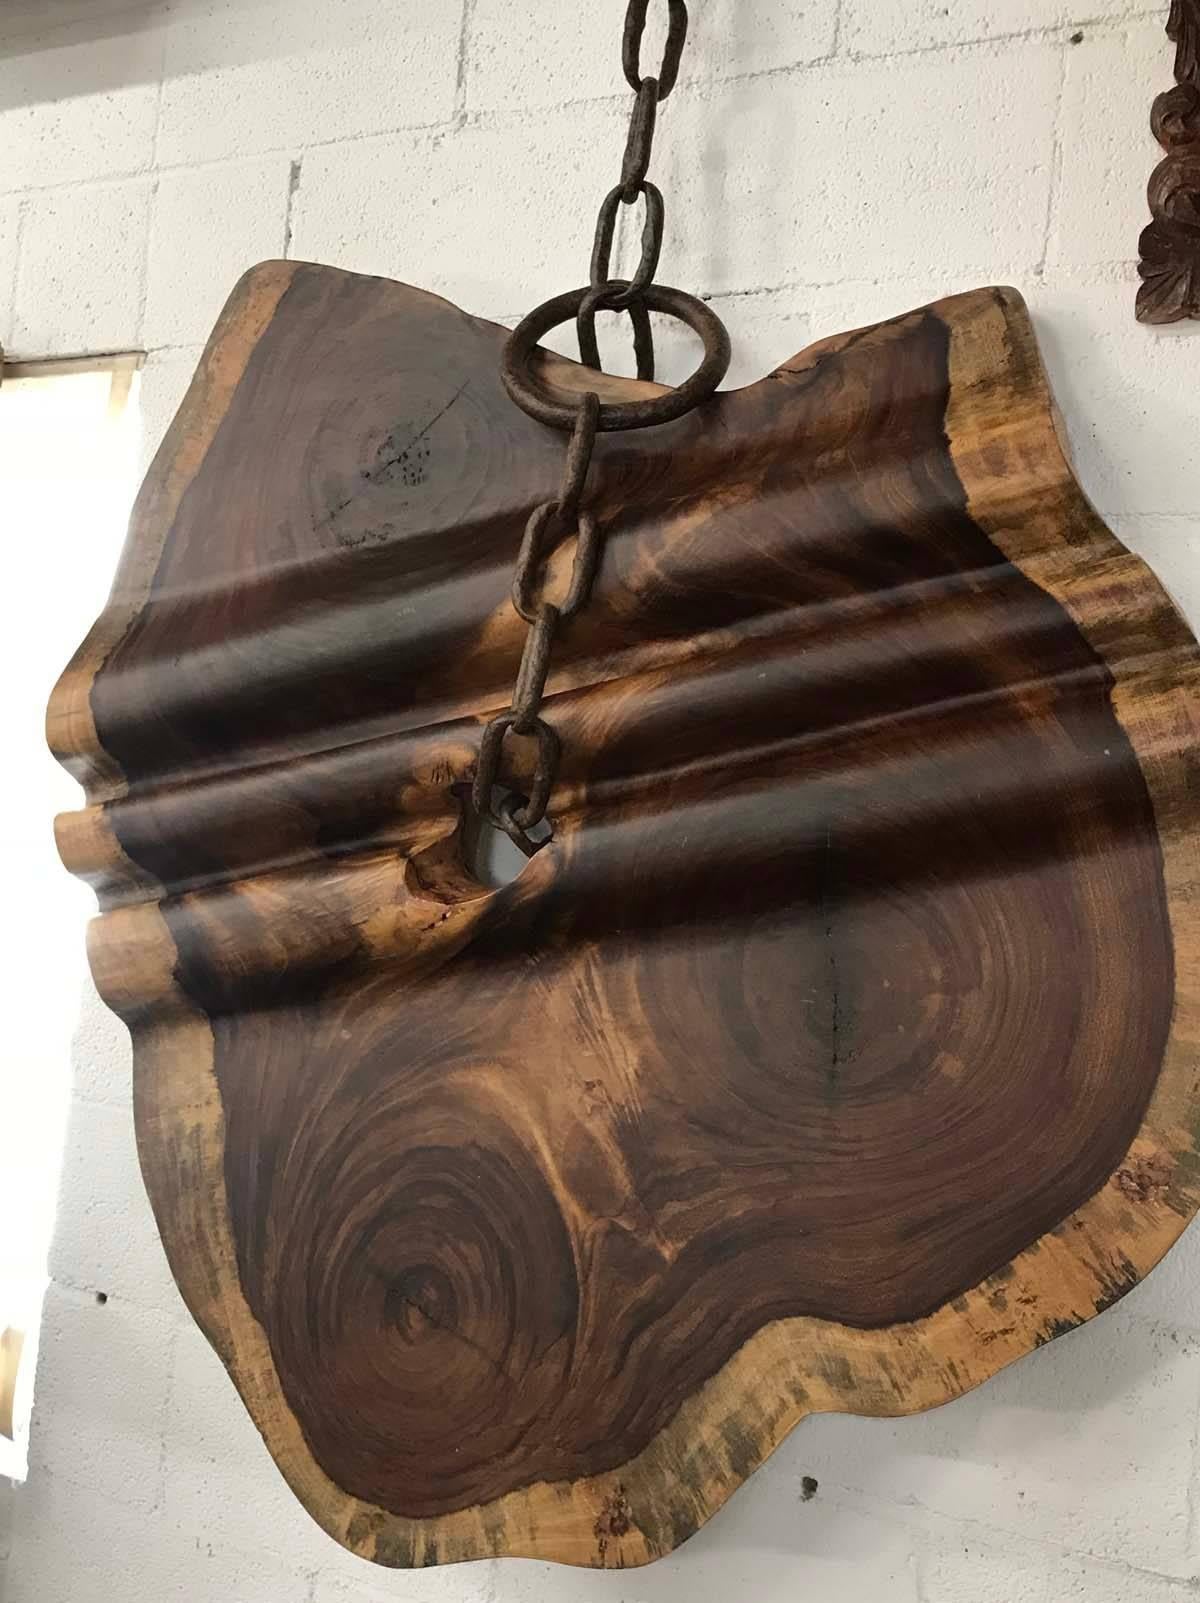 Beautiful free-form, organic shaped piece of concaste wood with vintage marine chain.
Wood has been hand-carved by master carvers, to look like a rolled out bolt of fabric. It undulates. Wood is two inches thick and undulates so the overall